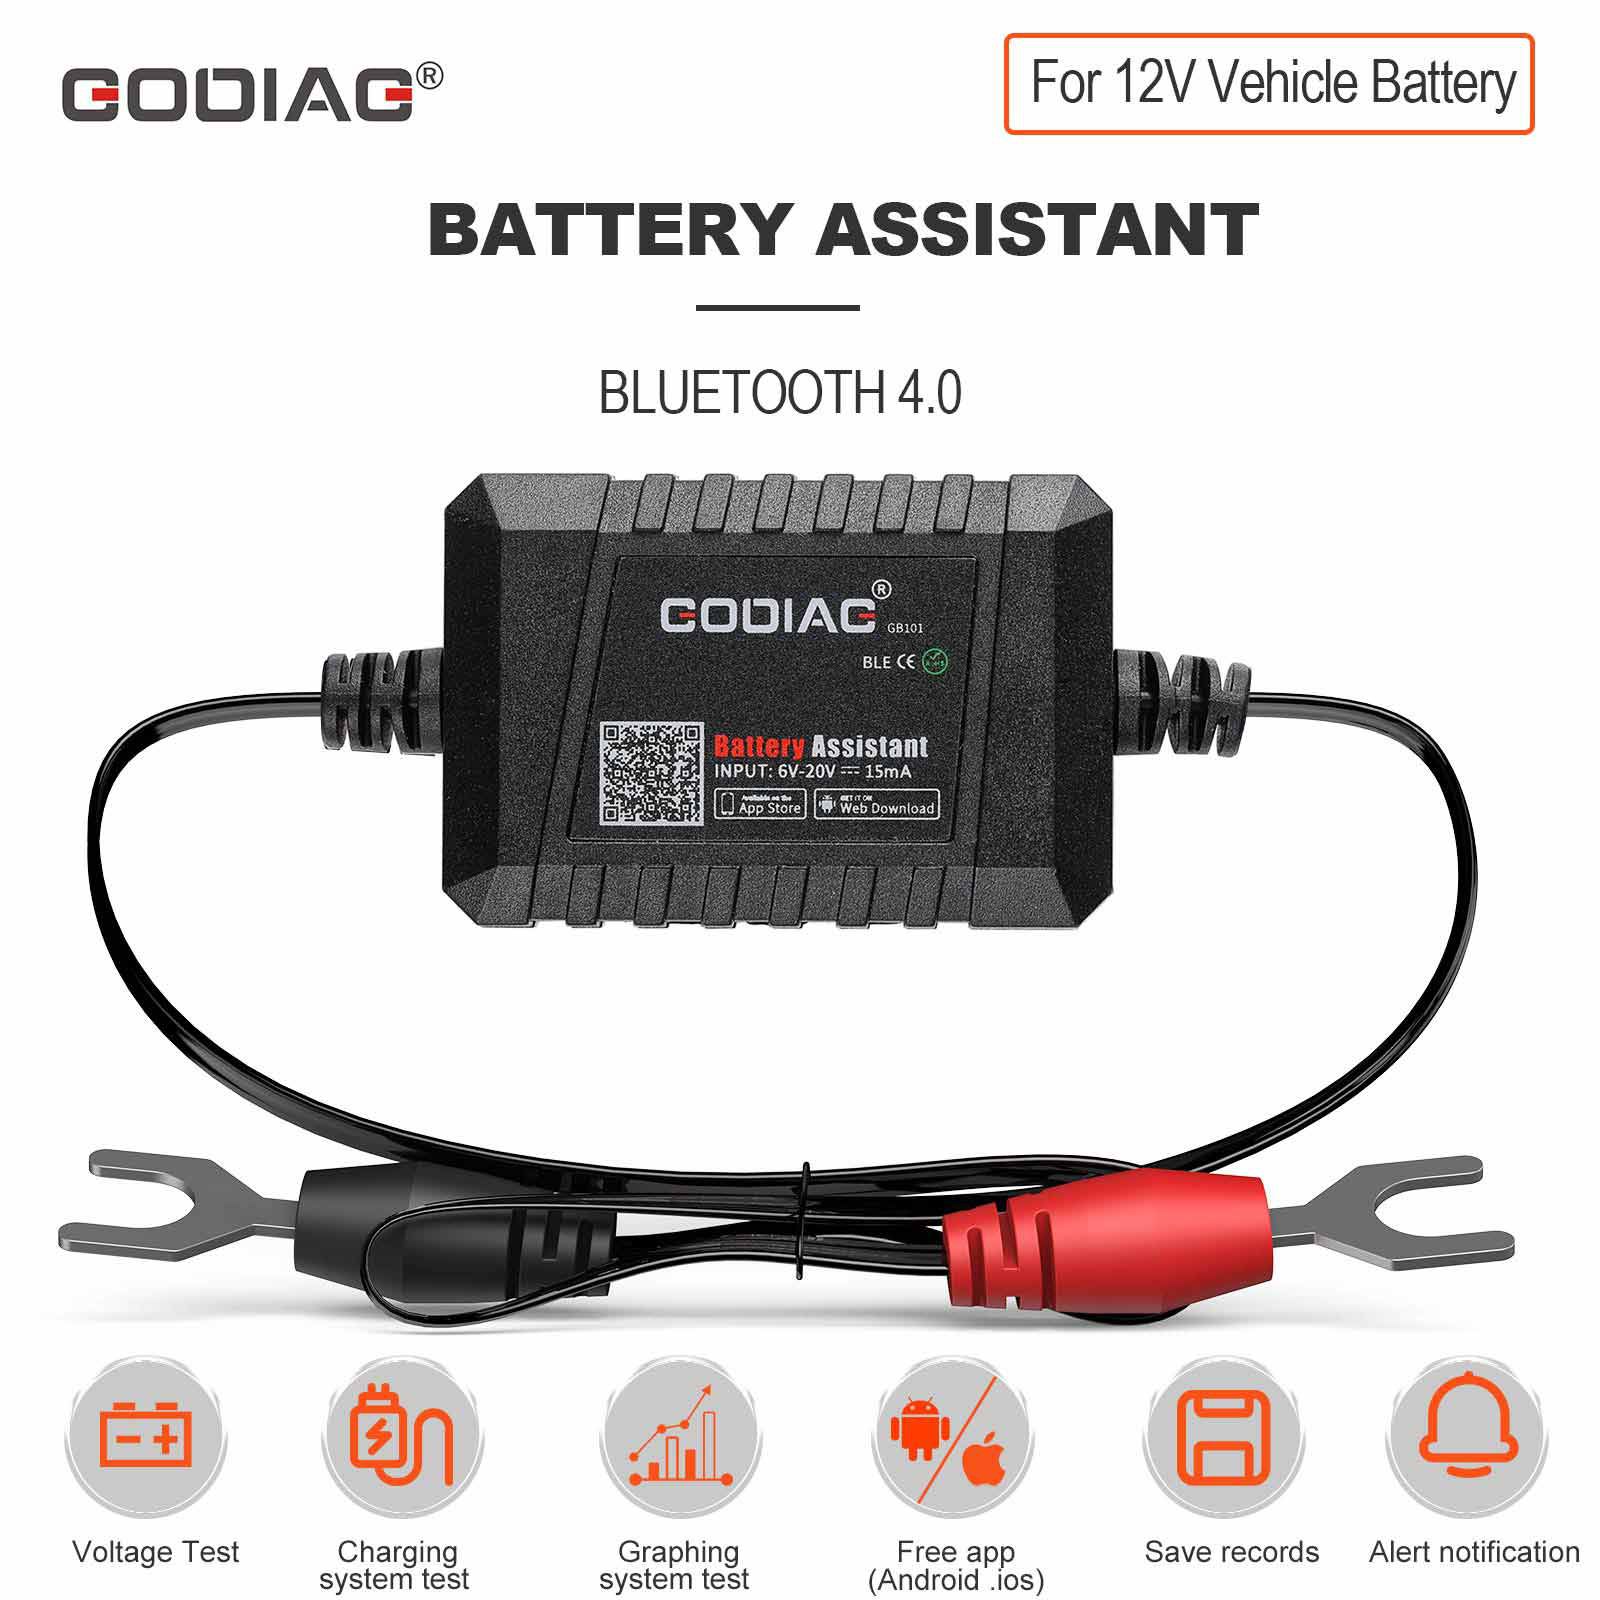 GODIAG GB101 Battery Assistant BlueTooth 4.0 Wireless 6-20V Automotive Battery Load Tester Diagnositic Analyzer Monitor for Android & iOS